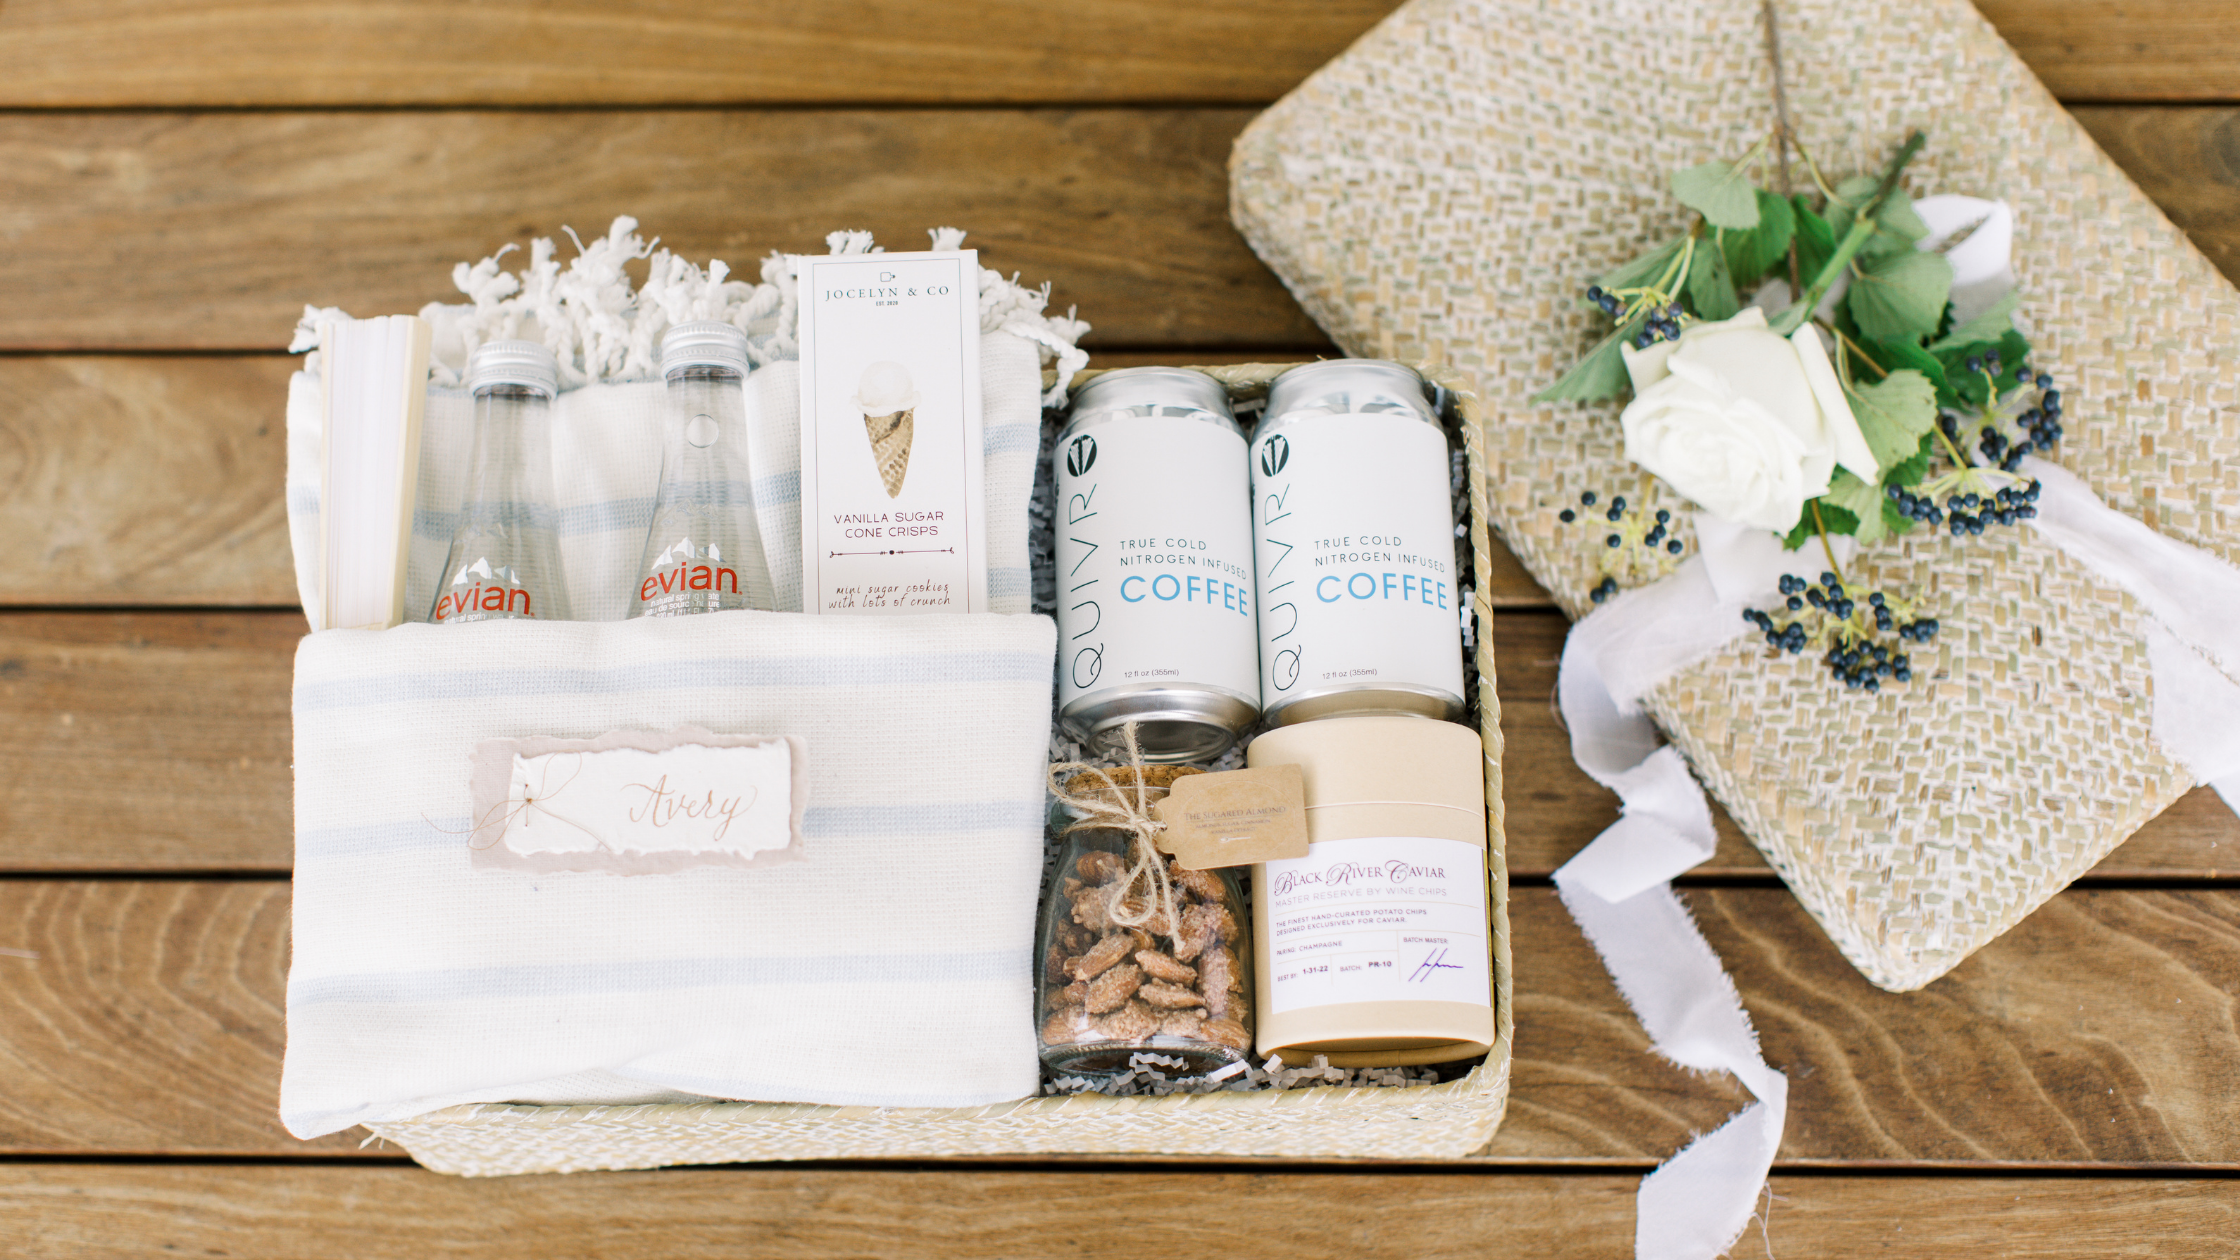 Top 10 Wedding Welcome Gifts of 2021